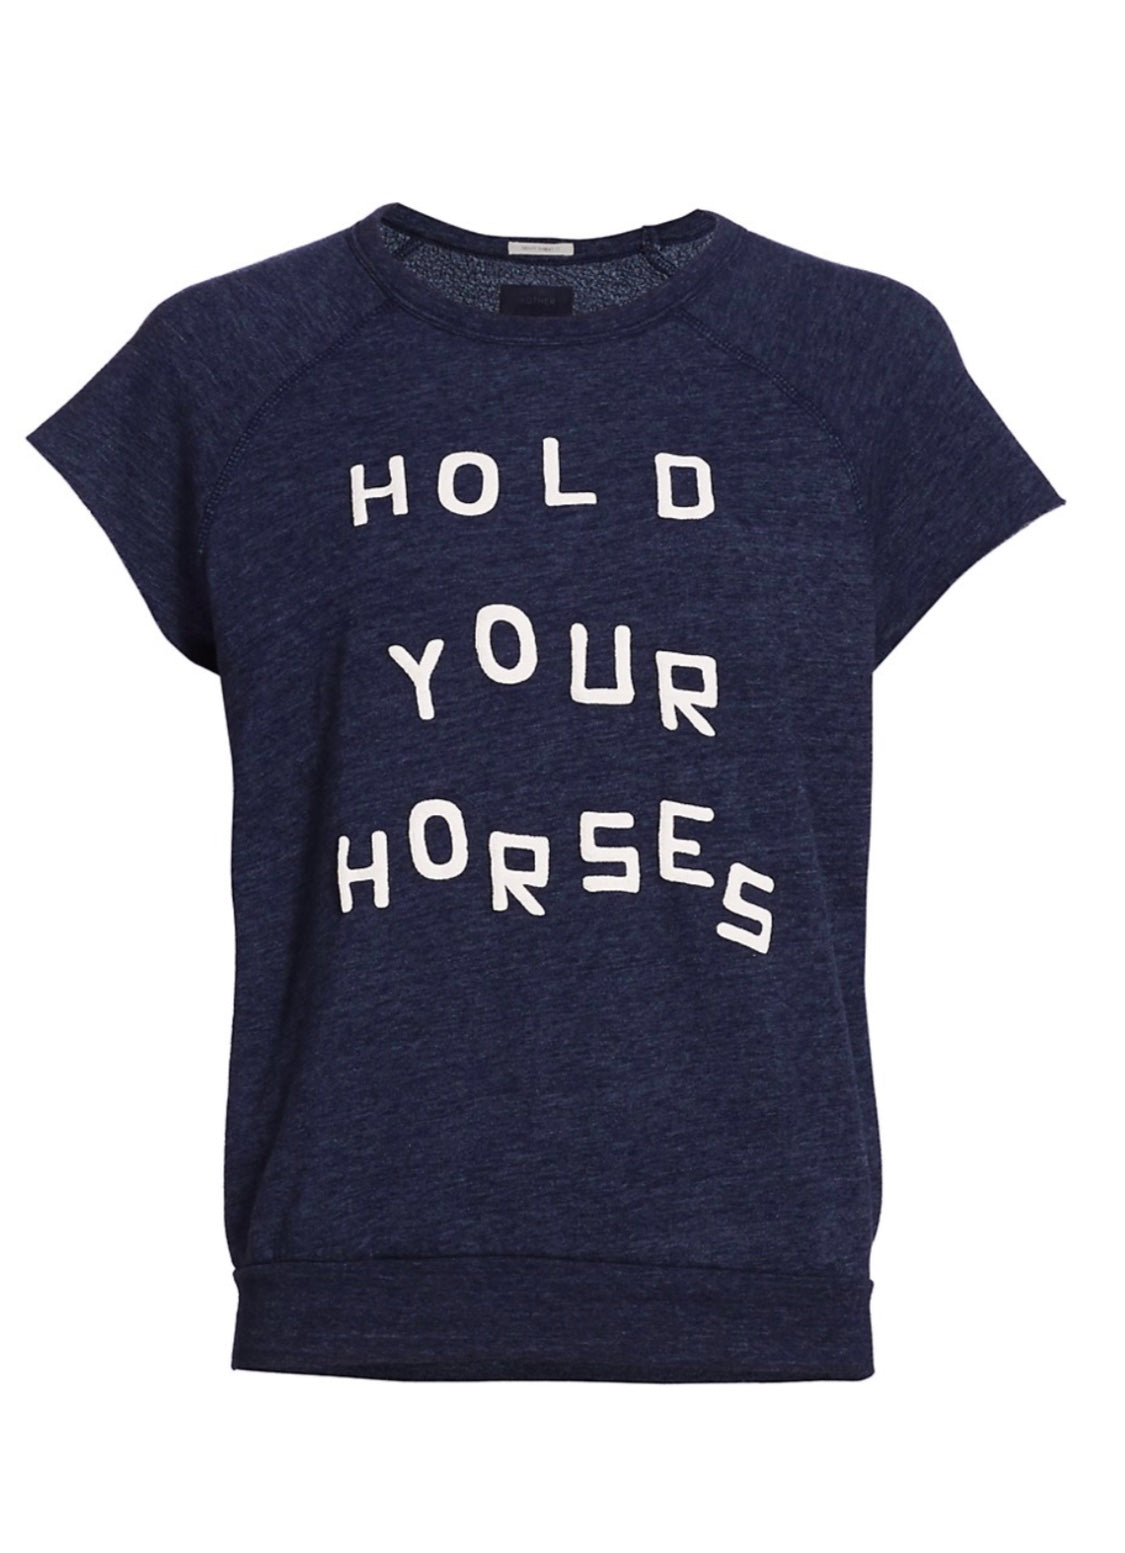 The S/S Cut Off Hugger Hold Your Horses – Atelier La Rouge